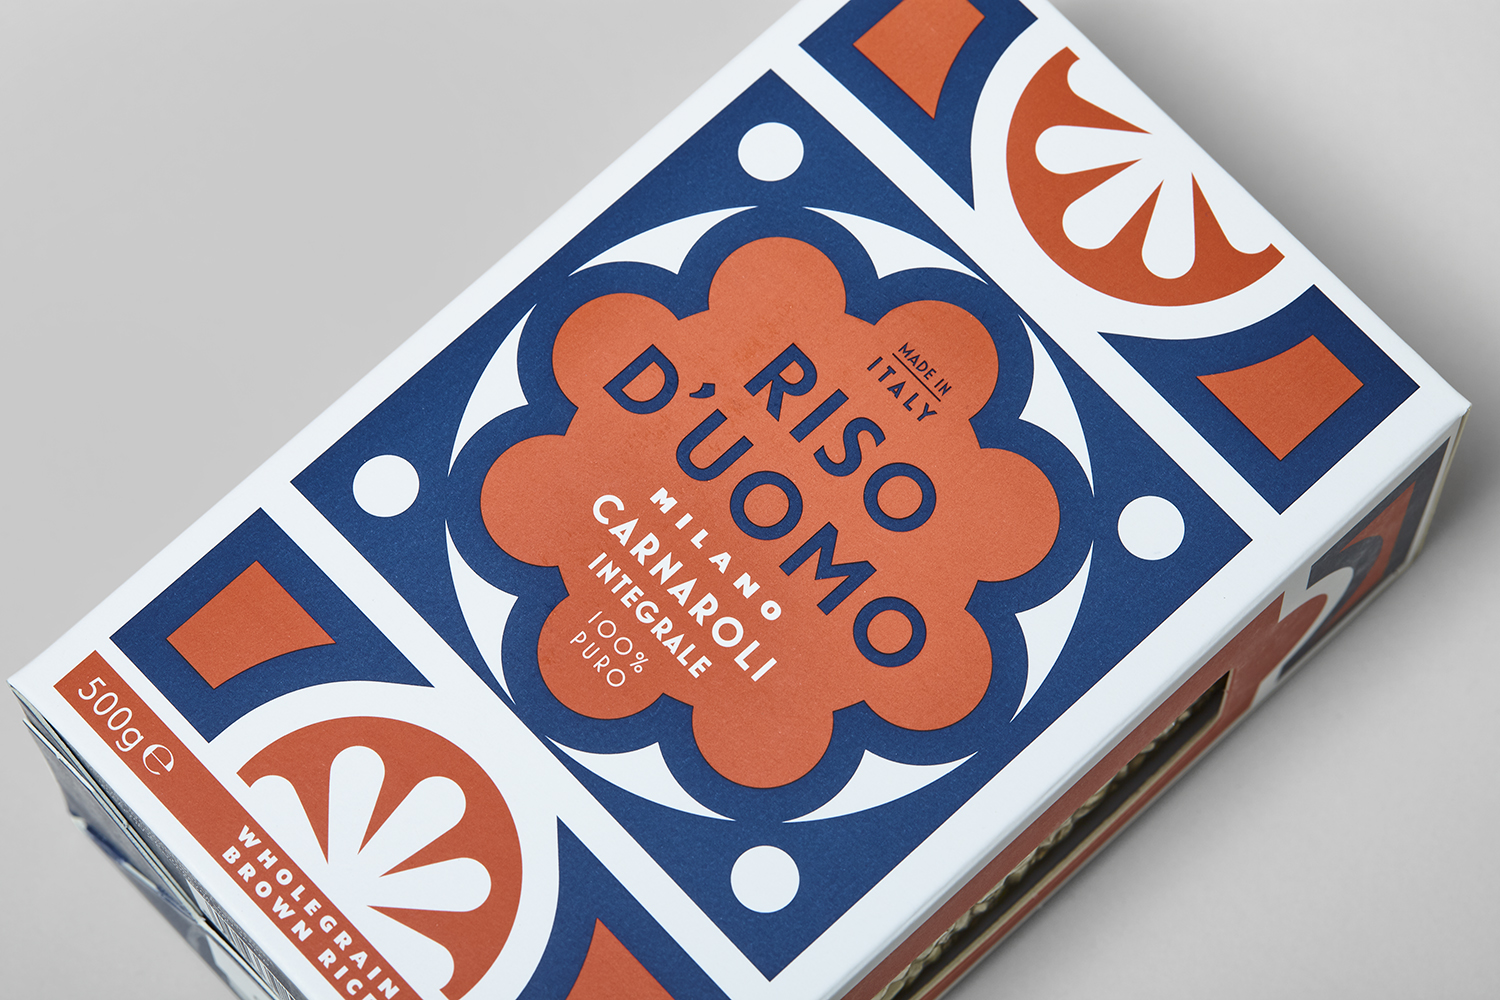 Branding and packaging by London-based Here Design for Milanese artisan rice brand Riso D'uomo